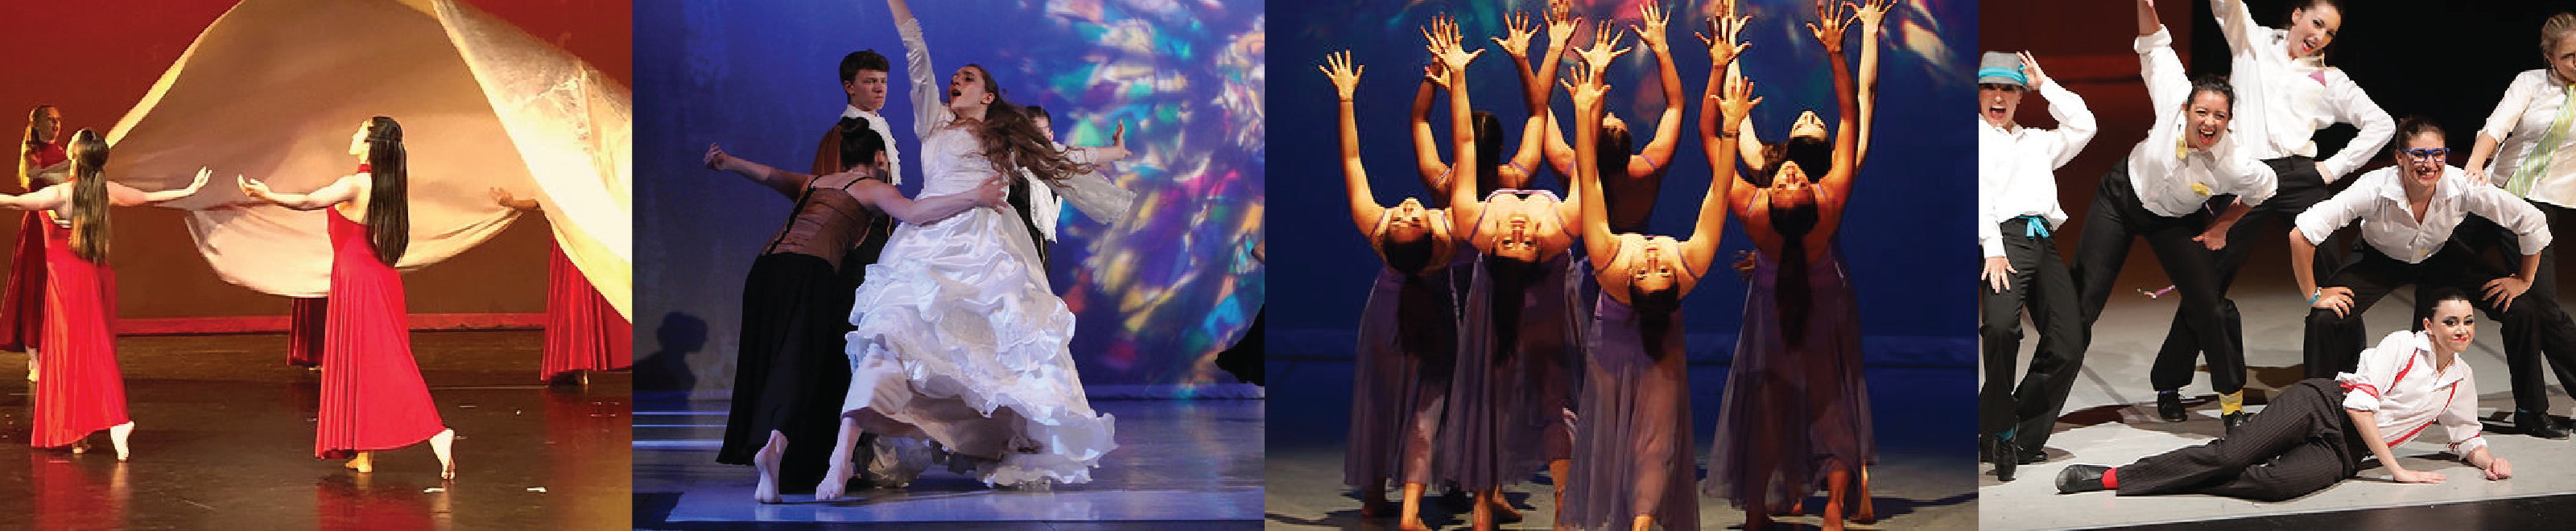 4 pictures illustrating students dancing on stage. 